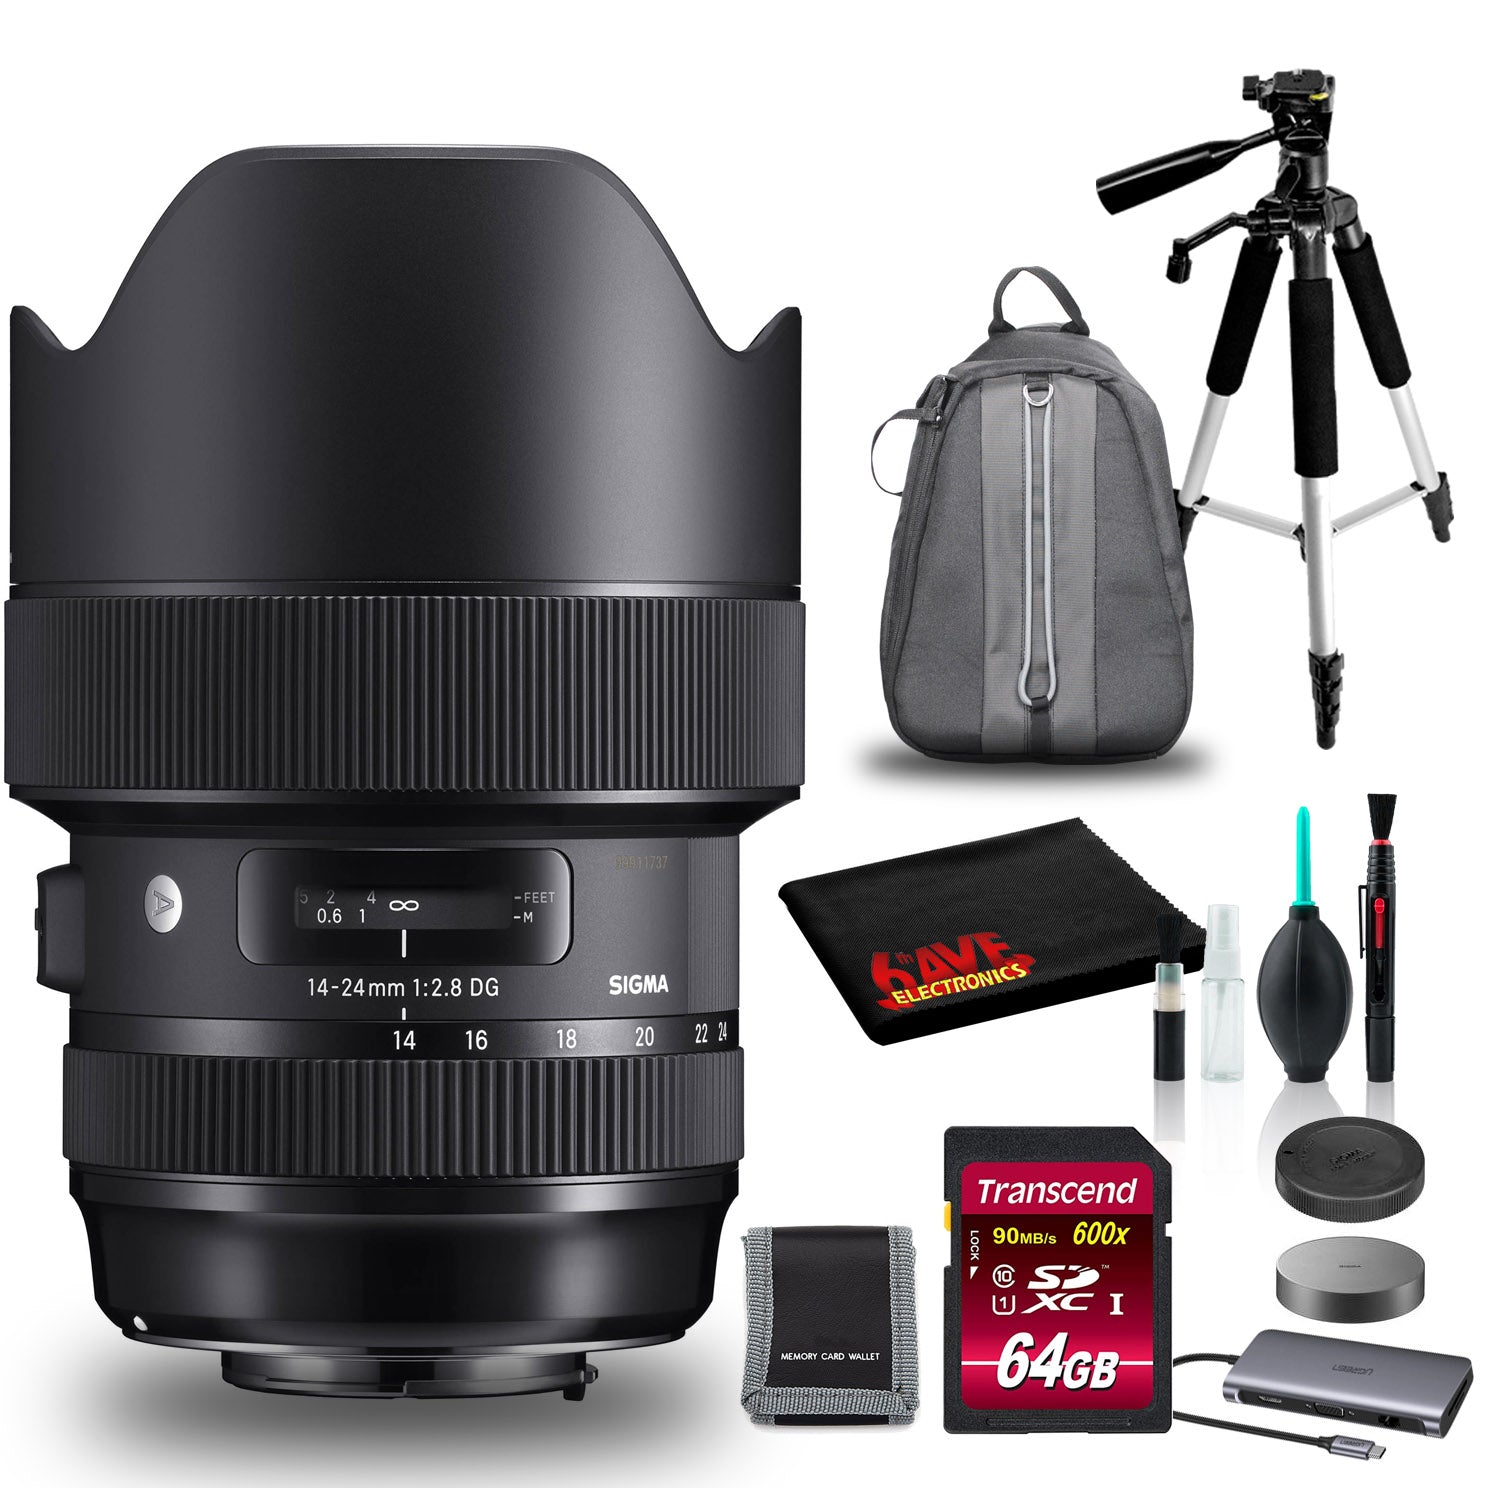 Sigma 14-24mm f/2.8 DG HSM Lens for Canon EF with Padded Bag, 64GB SD Bundle